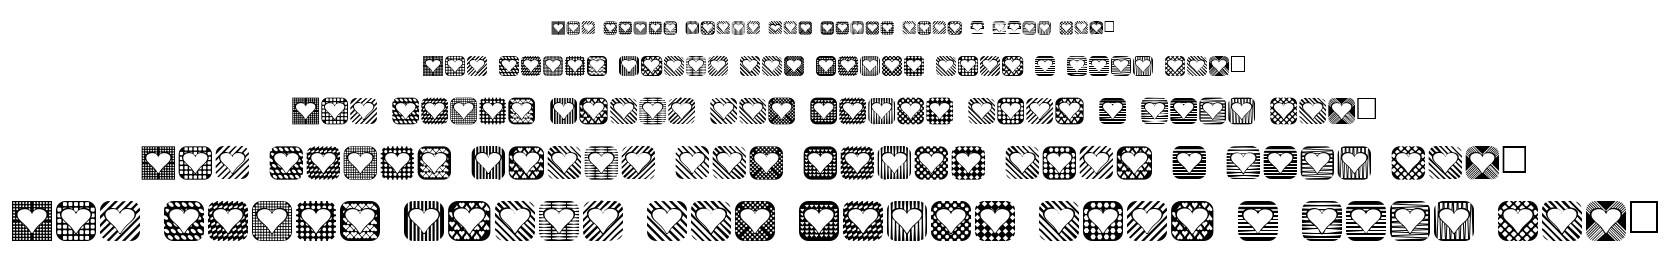 Heart Things 2 font